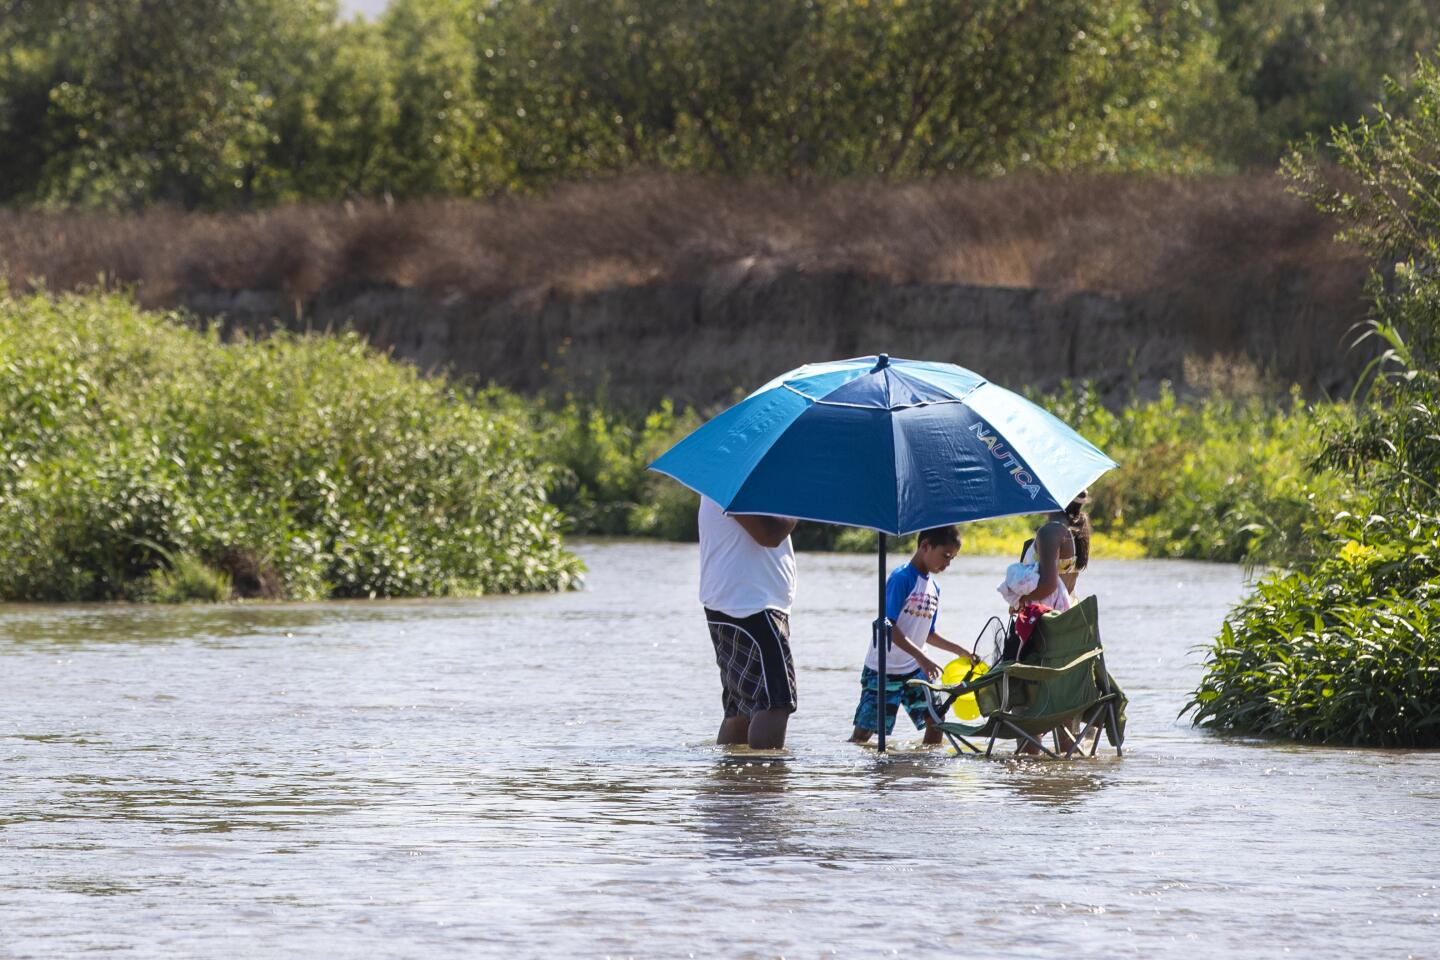 A family cools off in the Santa Ana river